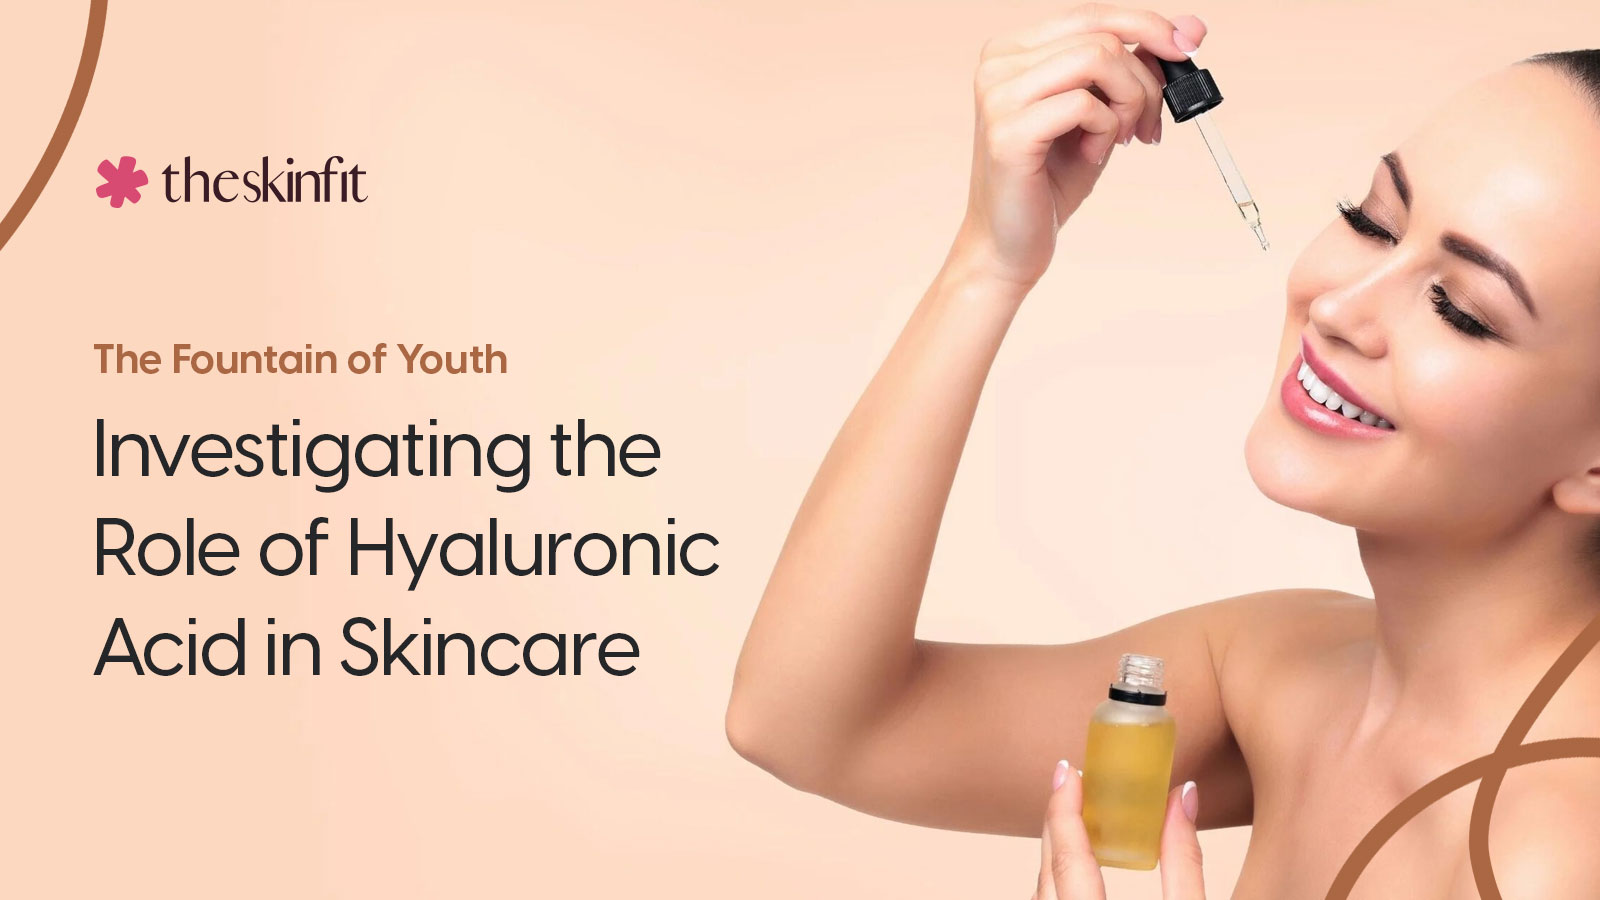 The Fountain of Youth: Investigating the Role of Hyaluronic Acid in Skincare